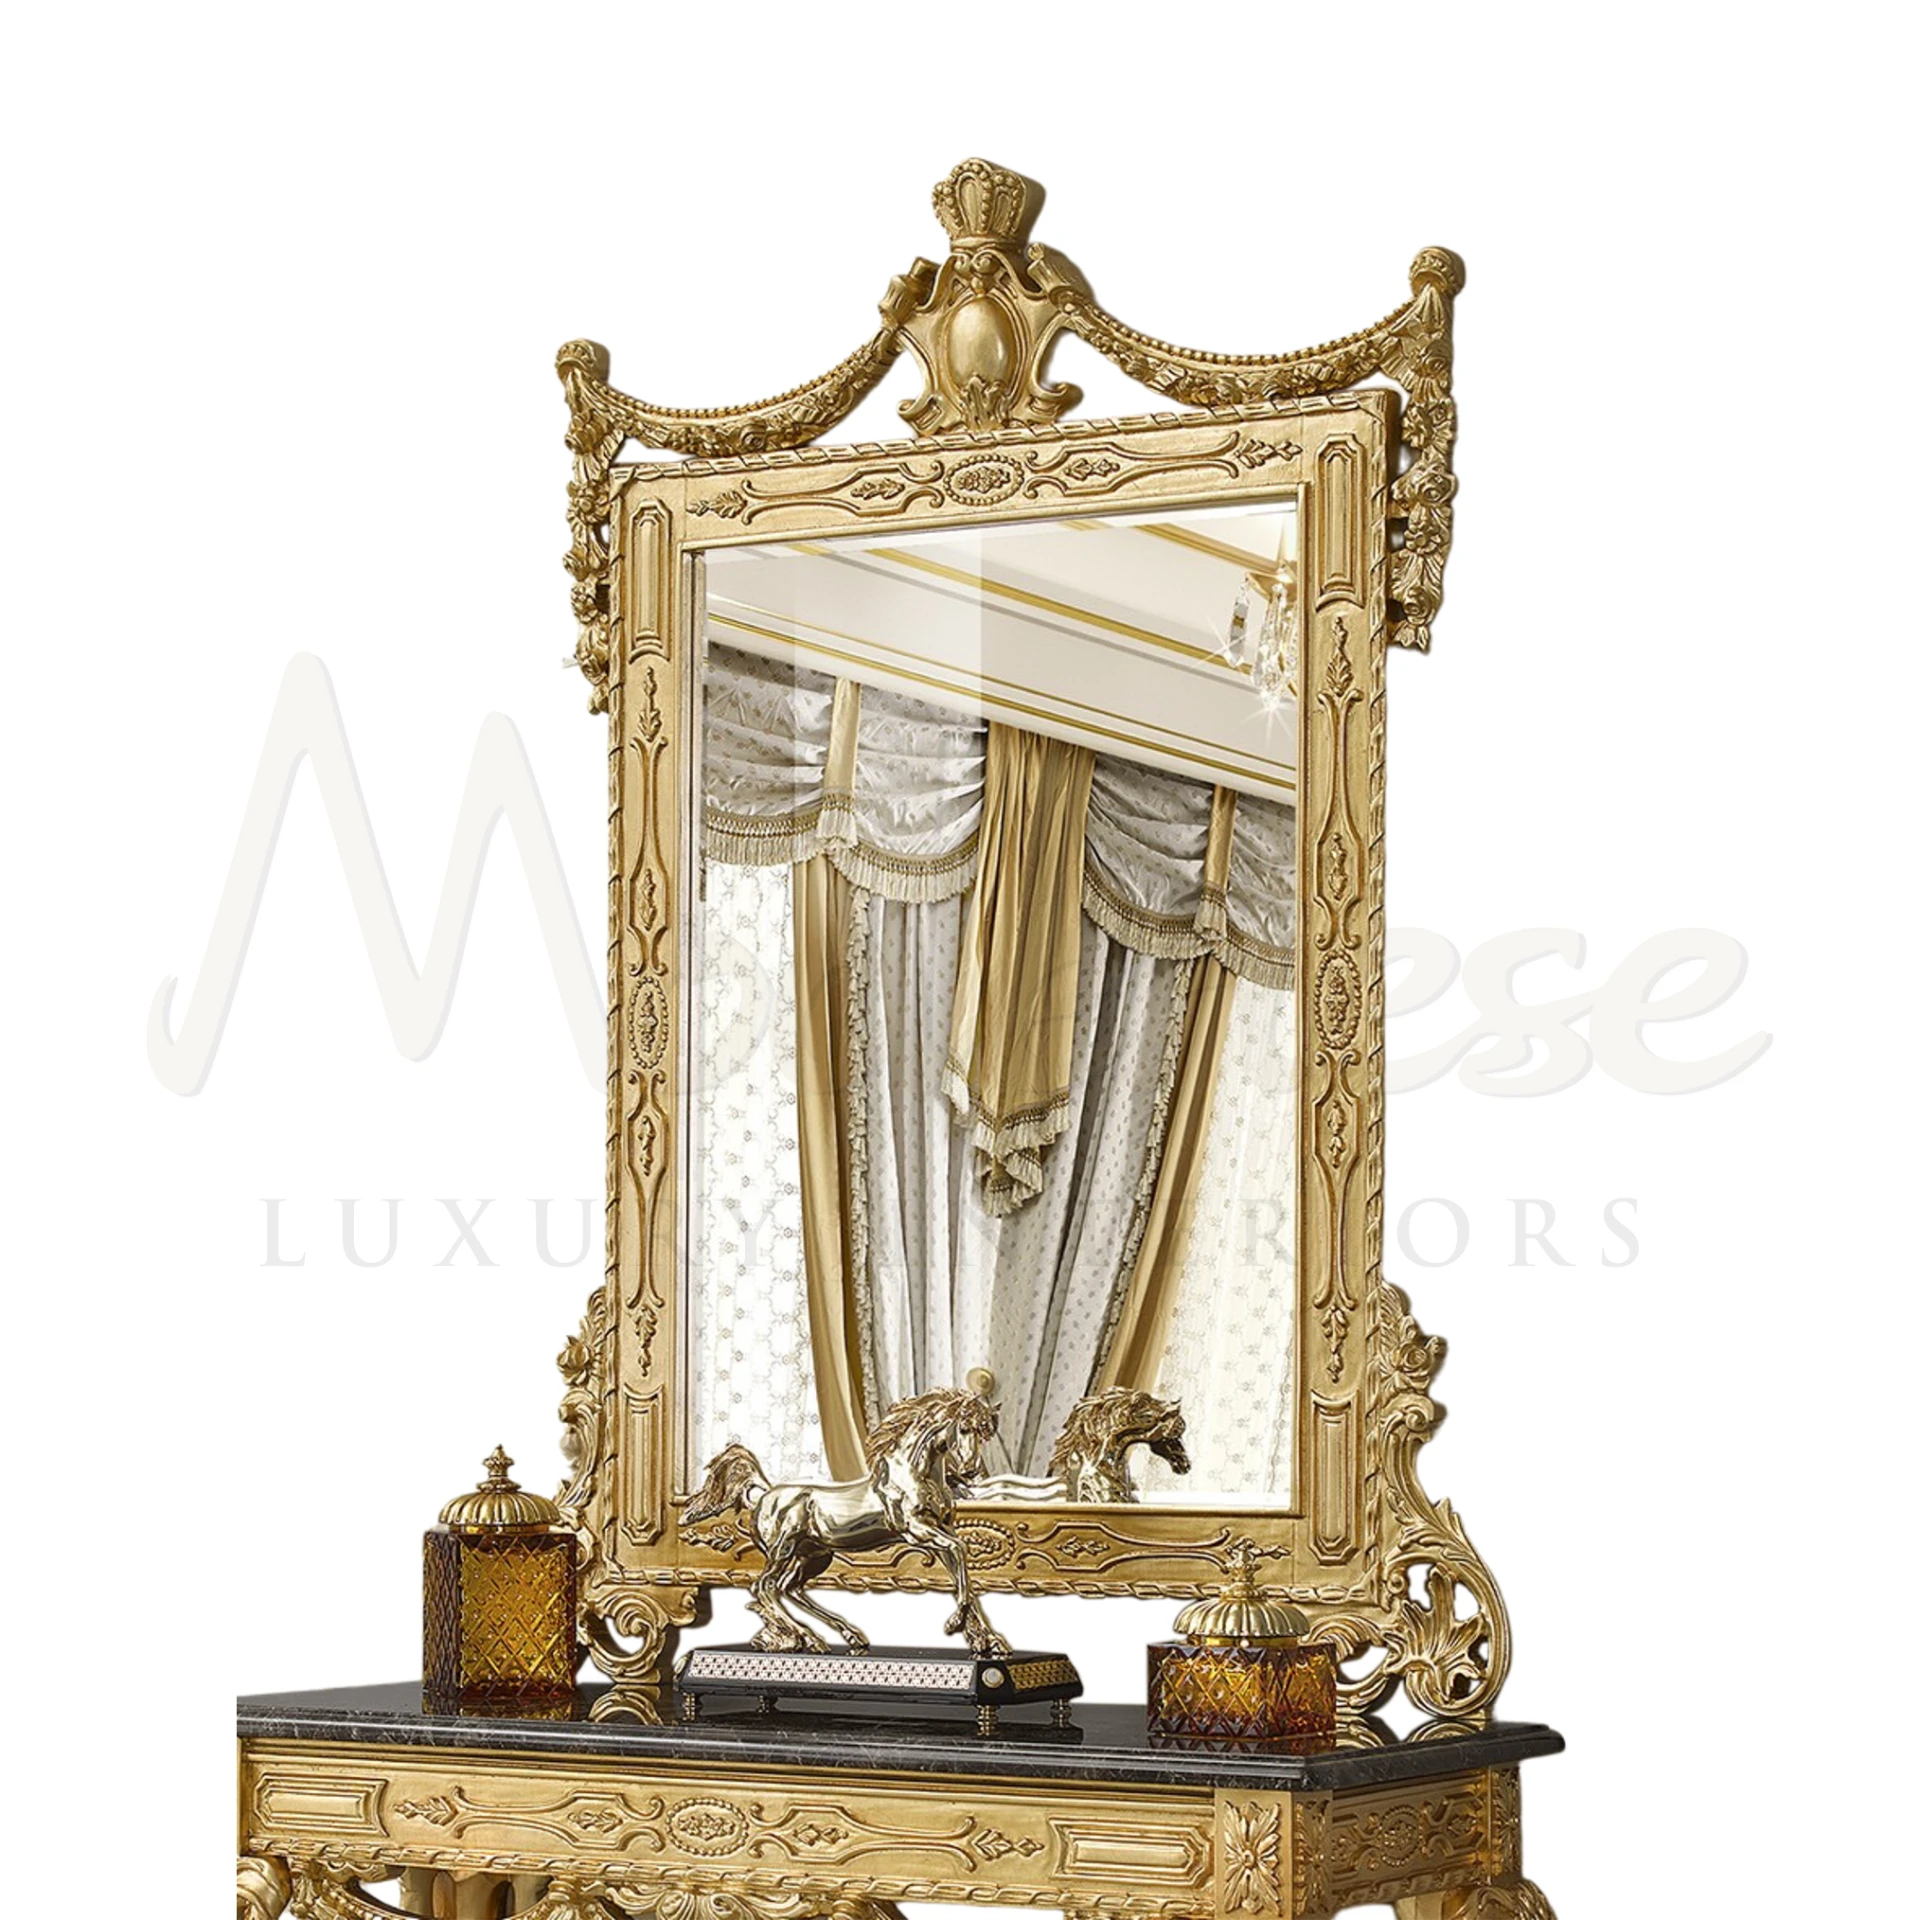 Exquisite Gold Leaf Mirror: a masterpiece of Italian design, bringing timeless elegance and style to luxury home decor.